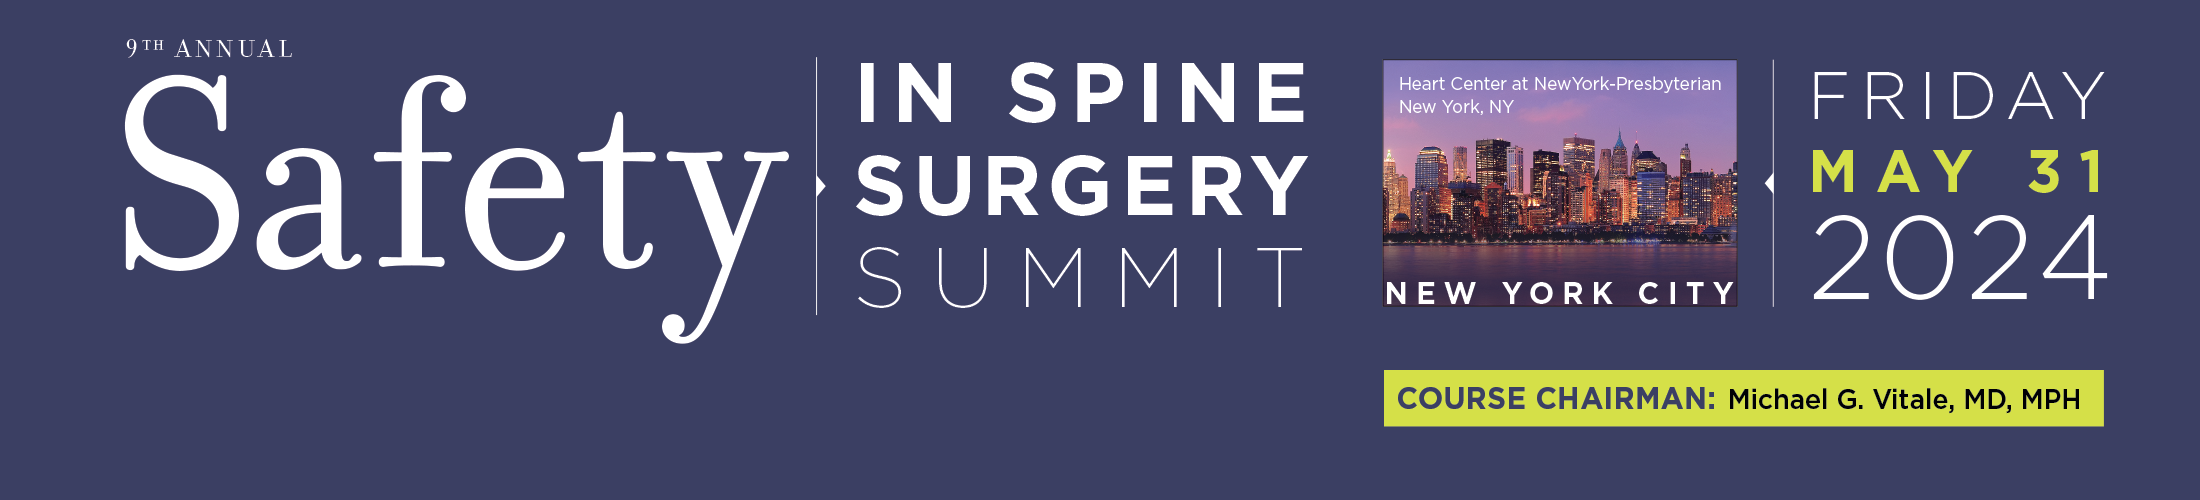 S3P - Safety in Spine Surgery Summit 2024 Hero